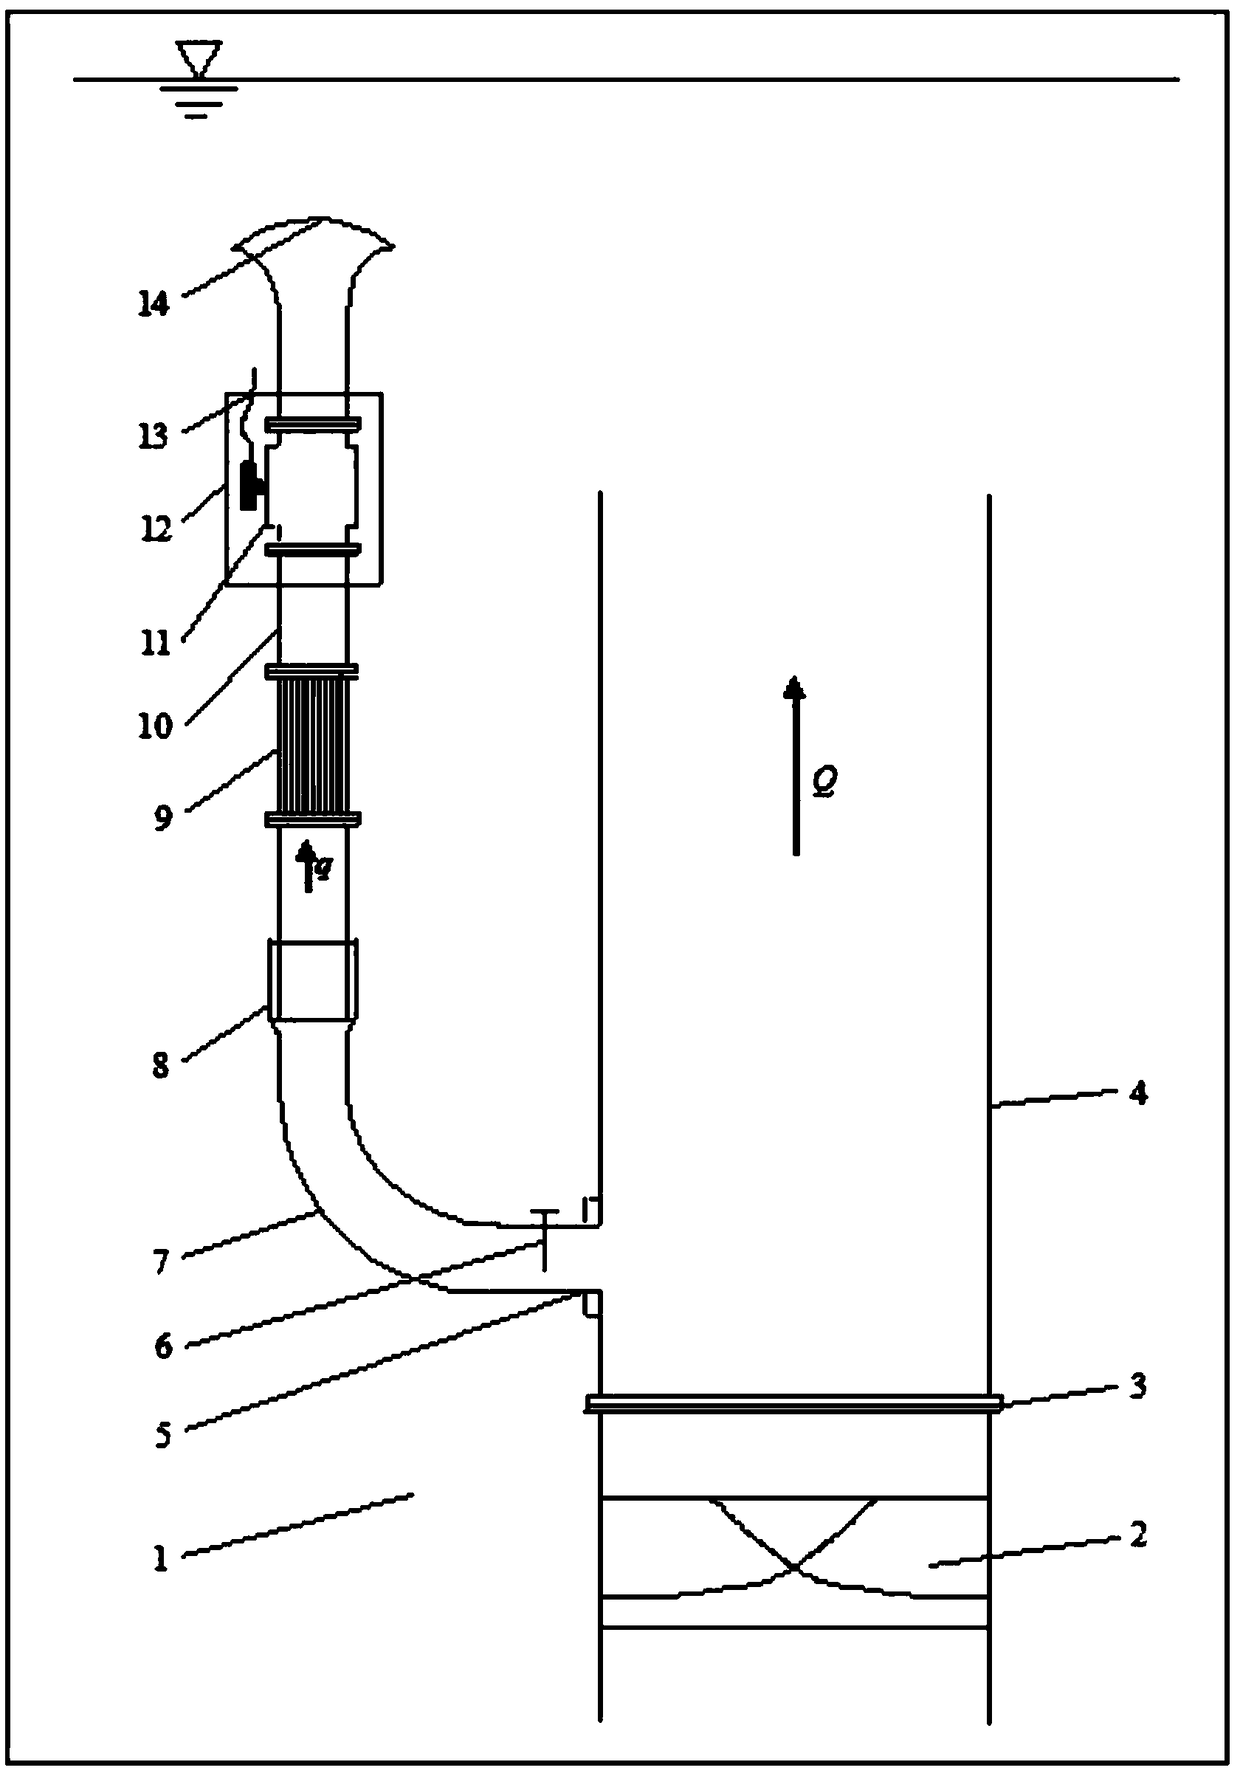 Flow measuring device and method